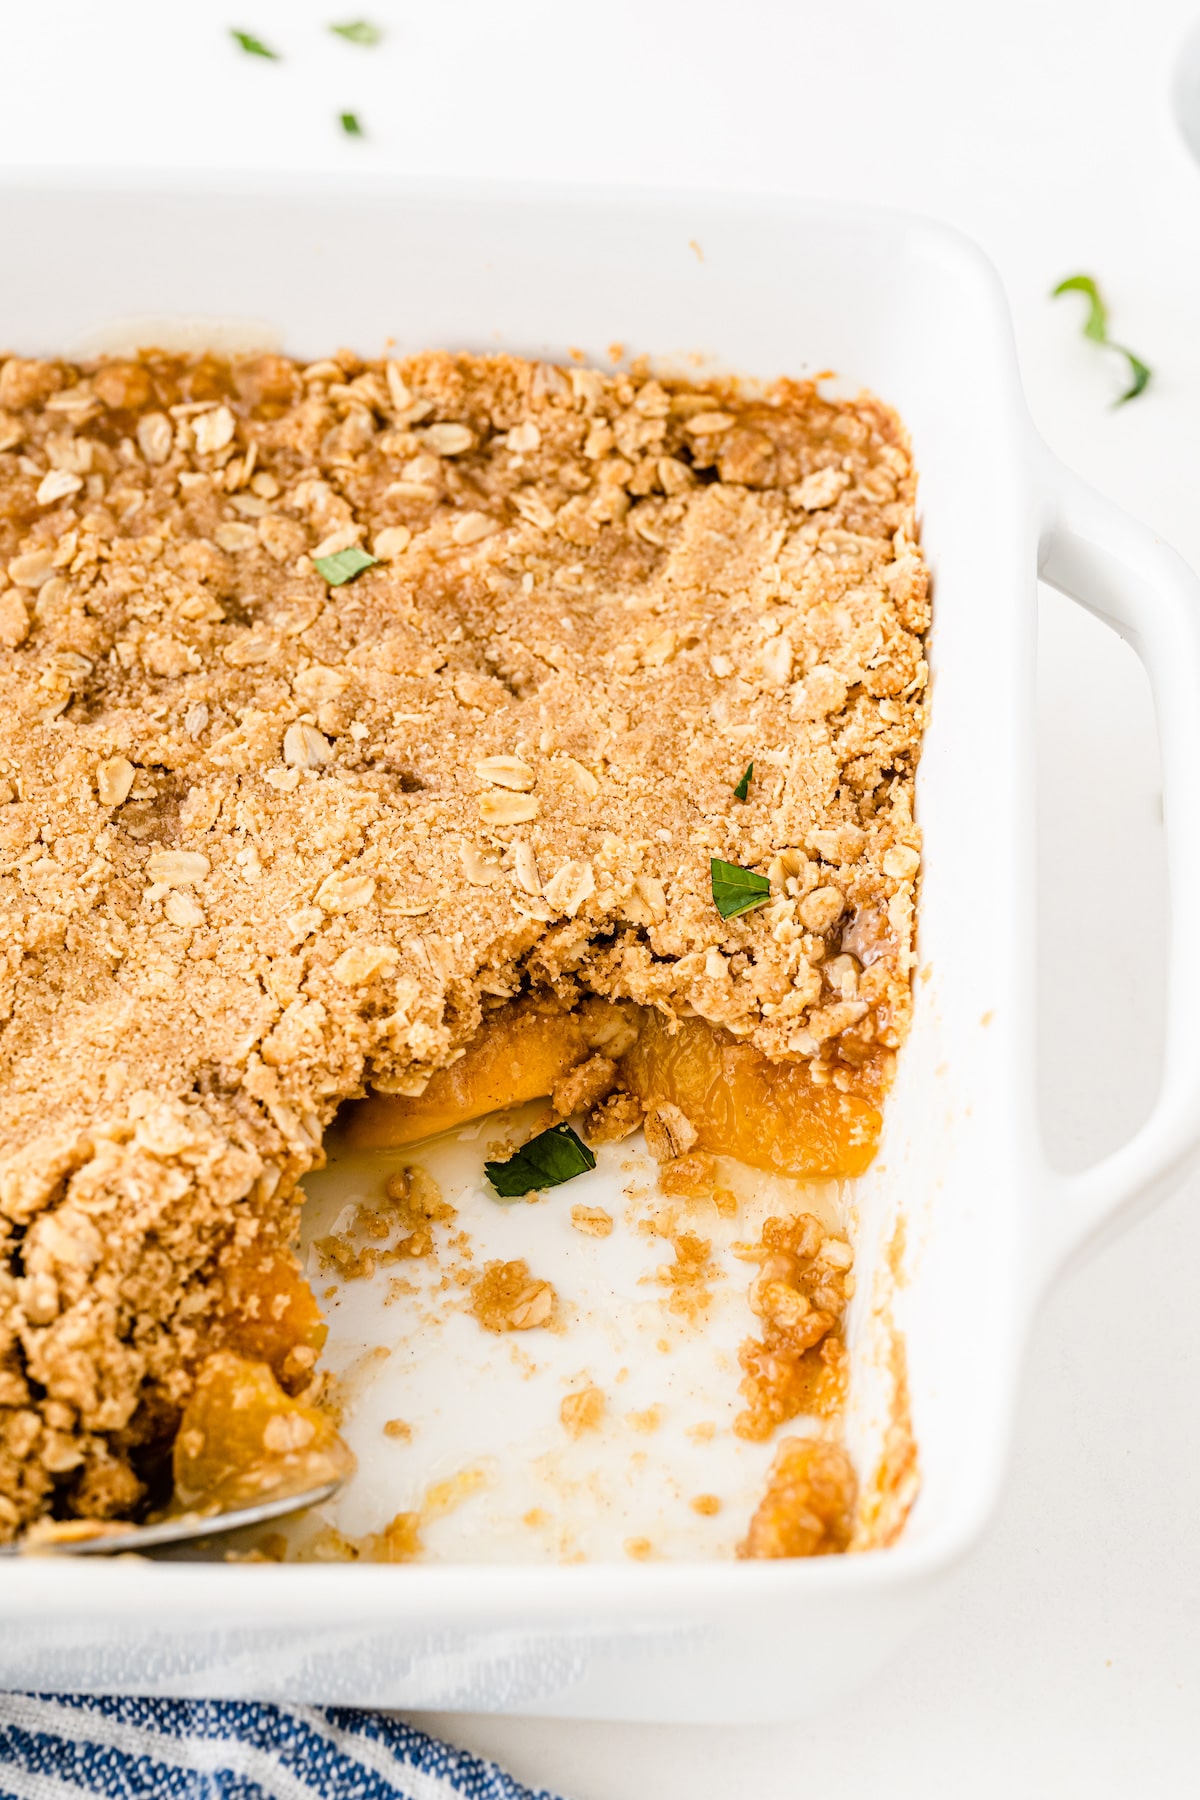 Peach crisp in a white baking dish with corner piece missing